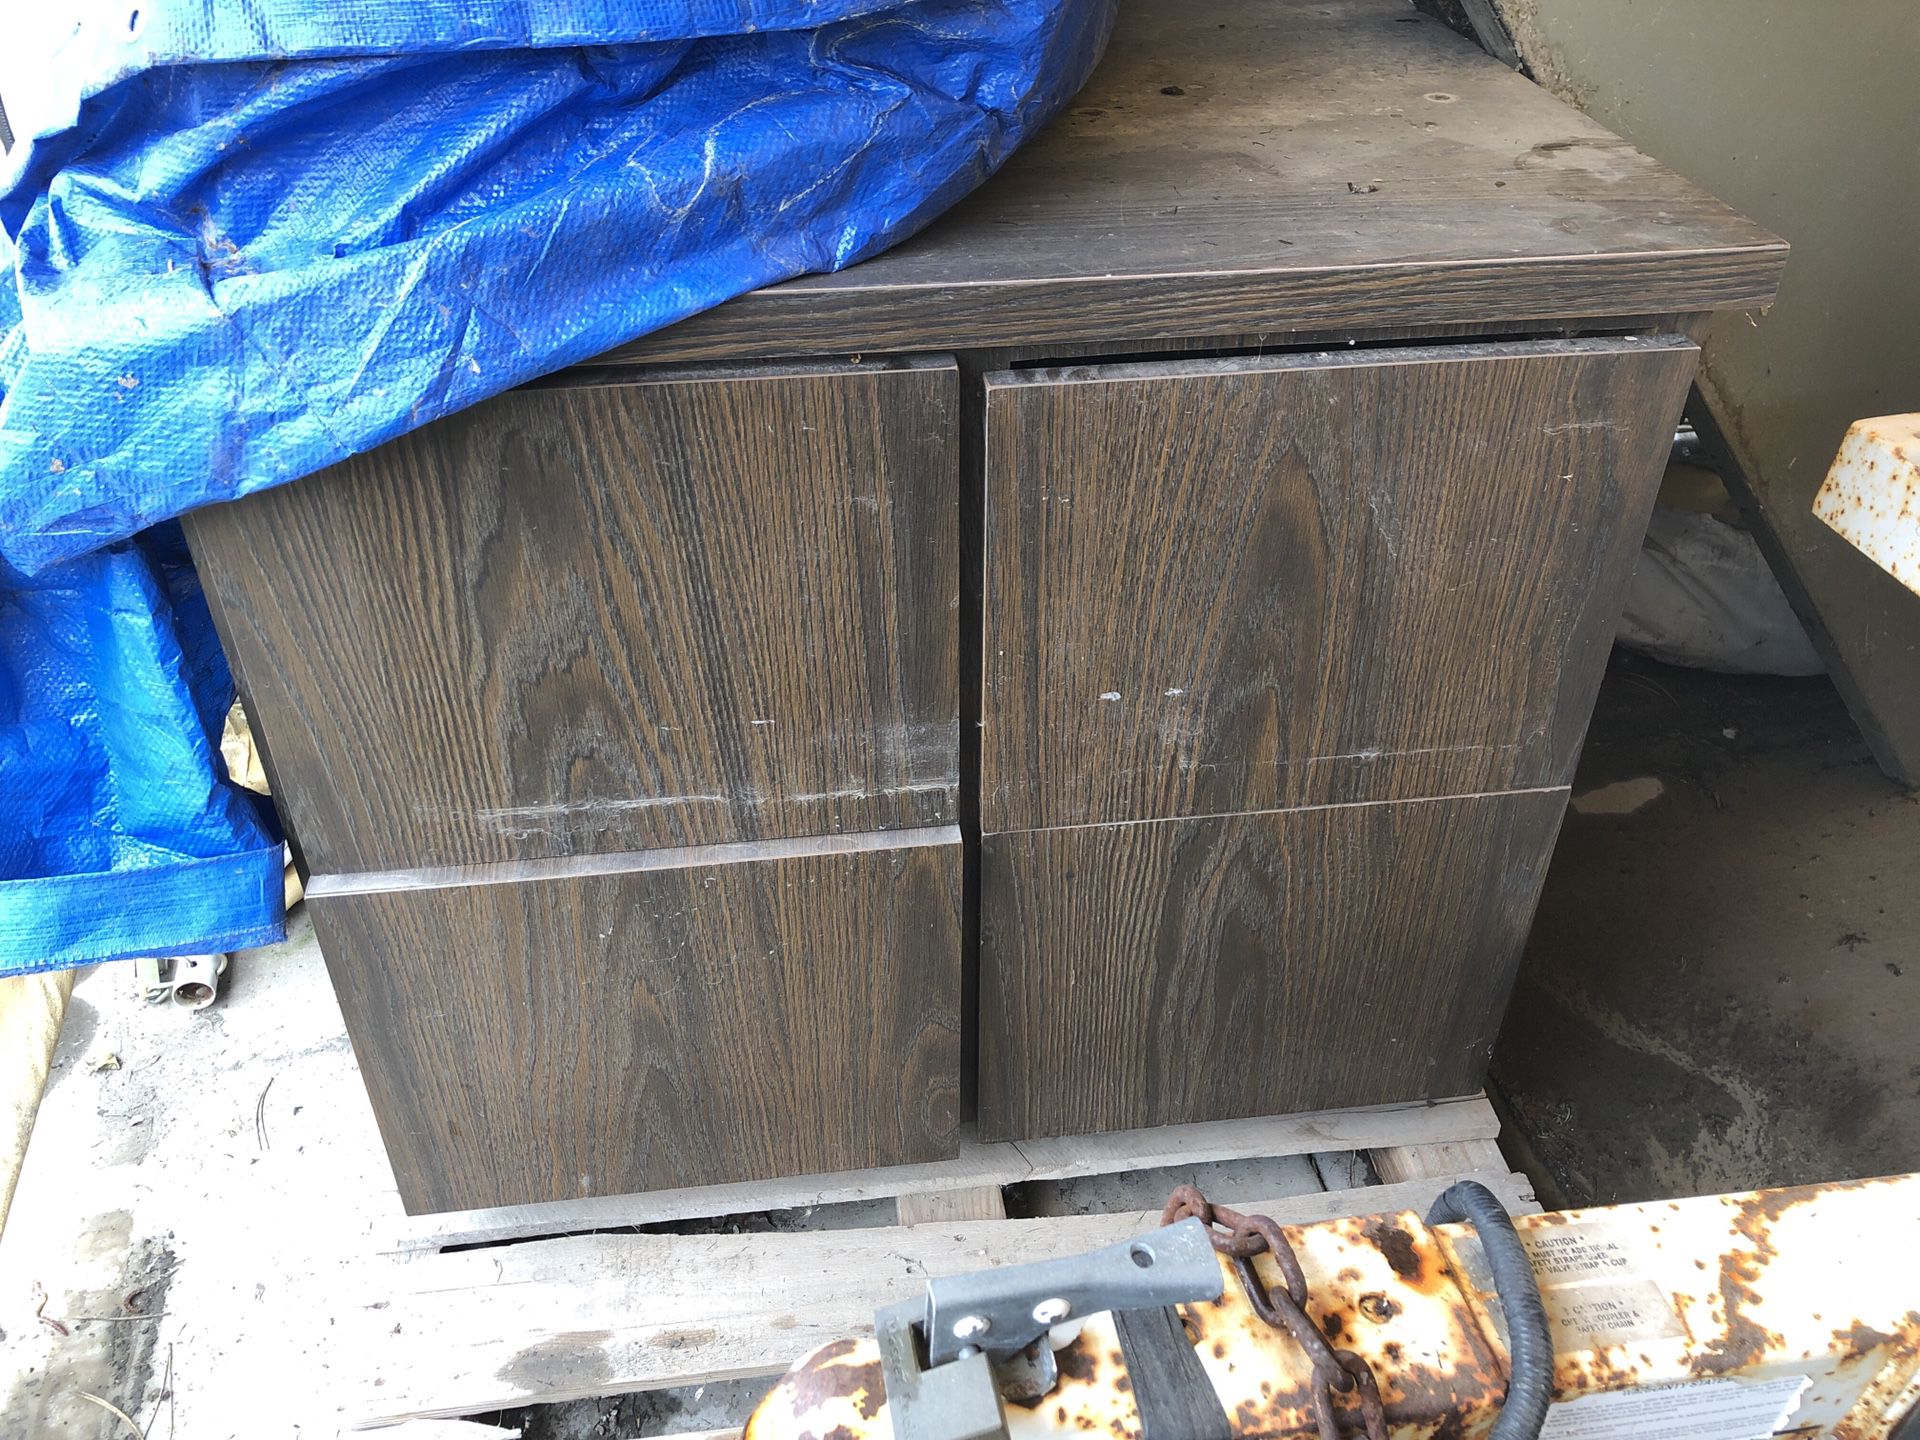 Solid wood file cabinet